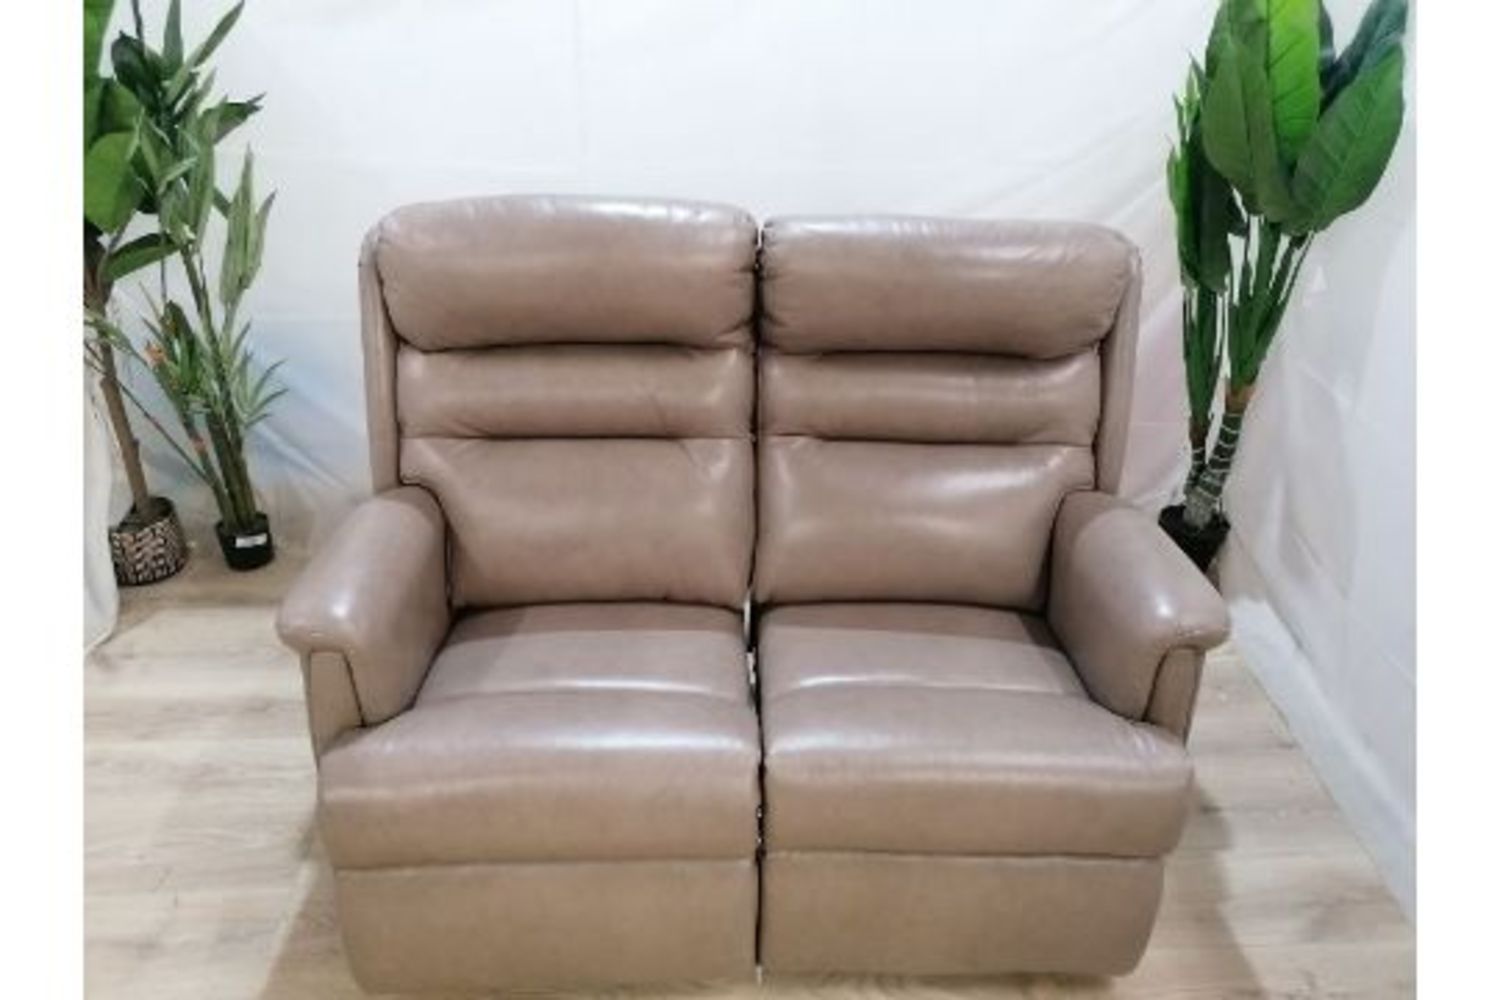 New delivery of Sofas and armchairs from Costco, Swoon, Oak furniture land and more